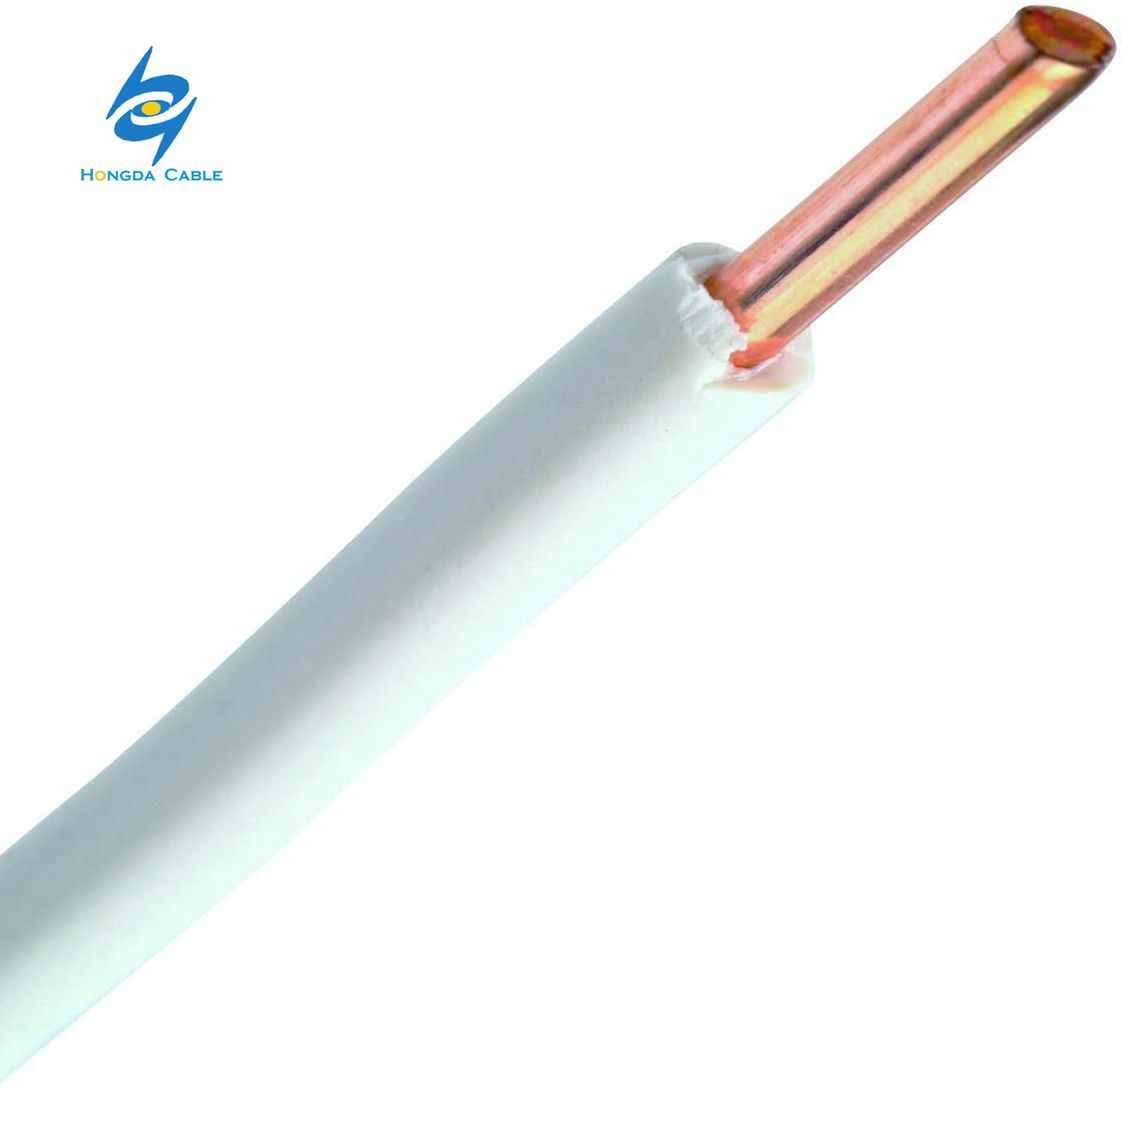 Solid Bare Copper Linear Low Density Polyethylene Insulated Tracer Wire